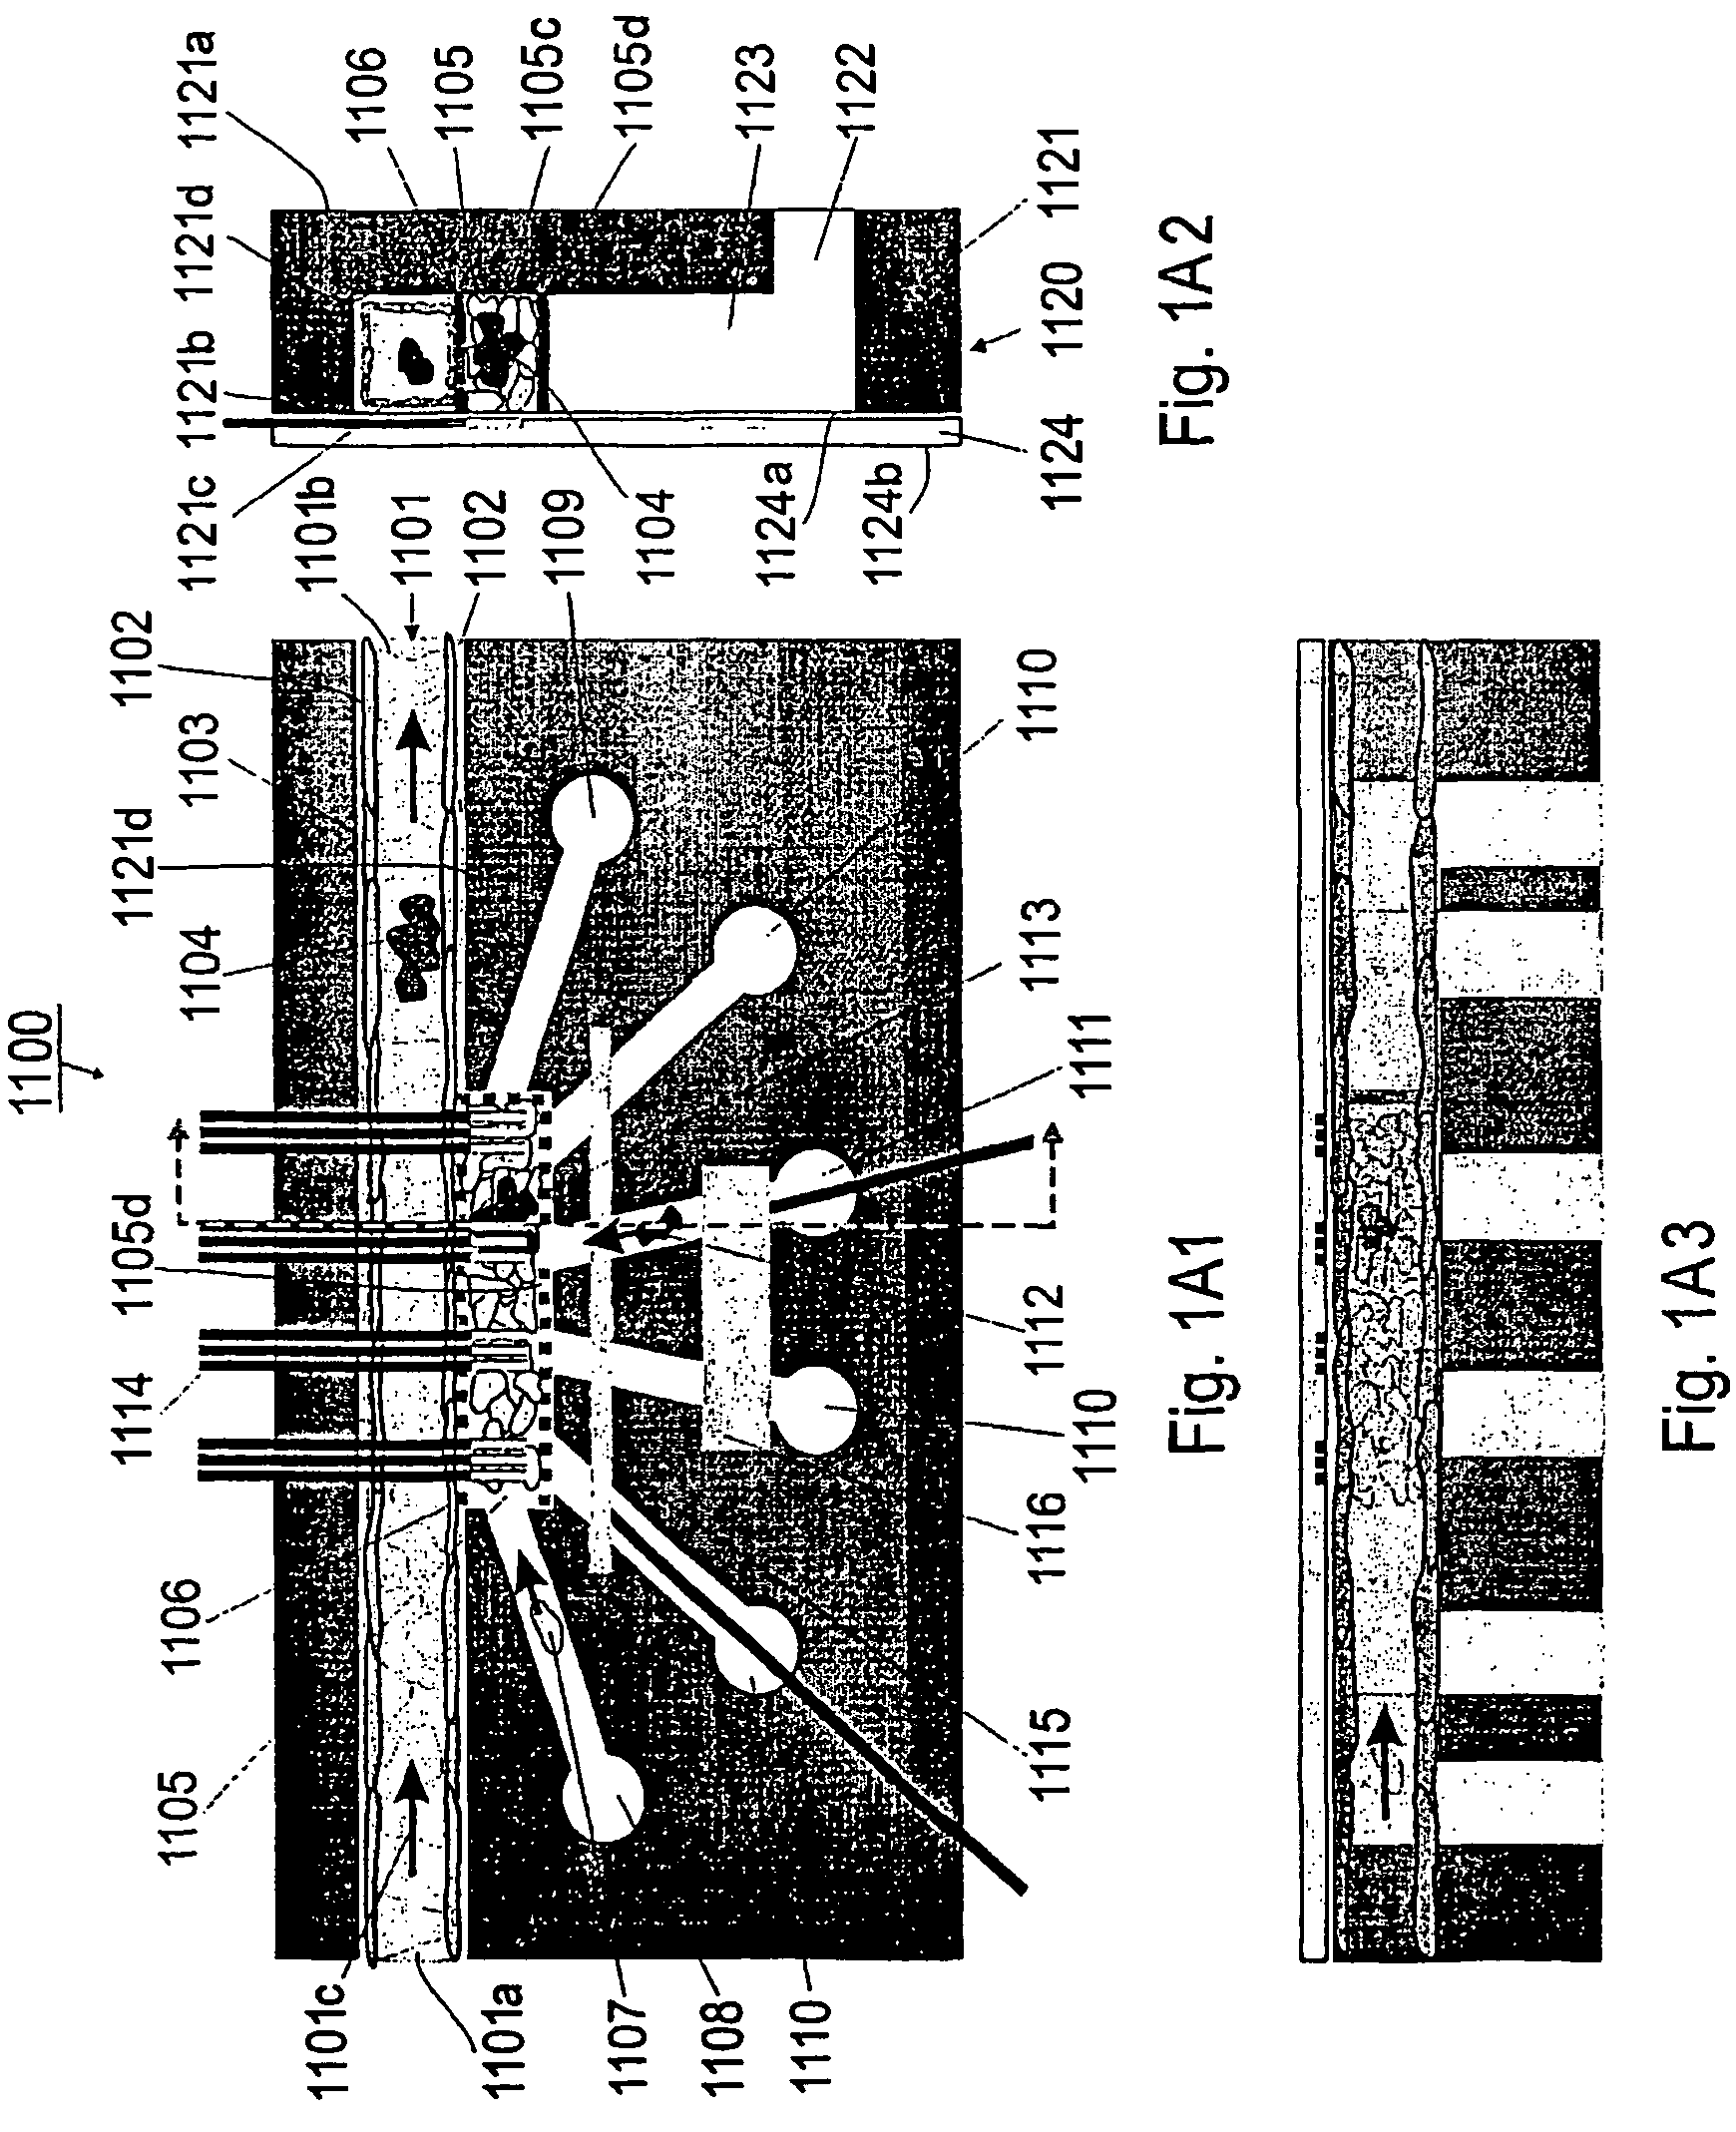 Capillary perfused bioreactors with multiple chambers